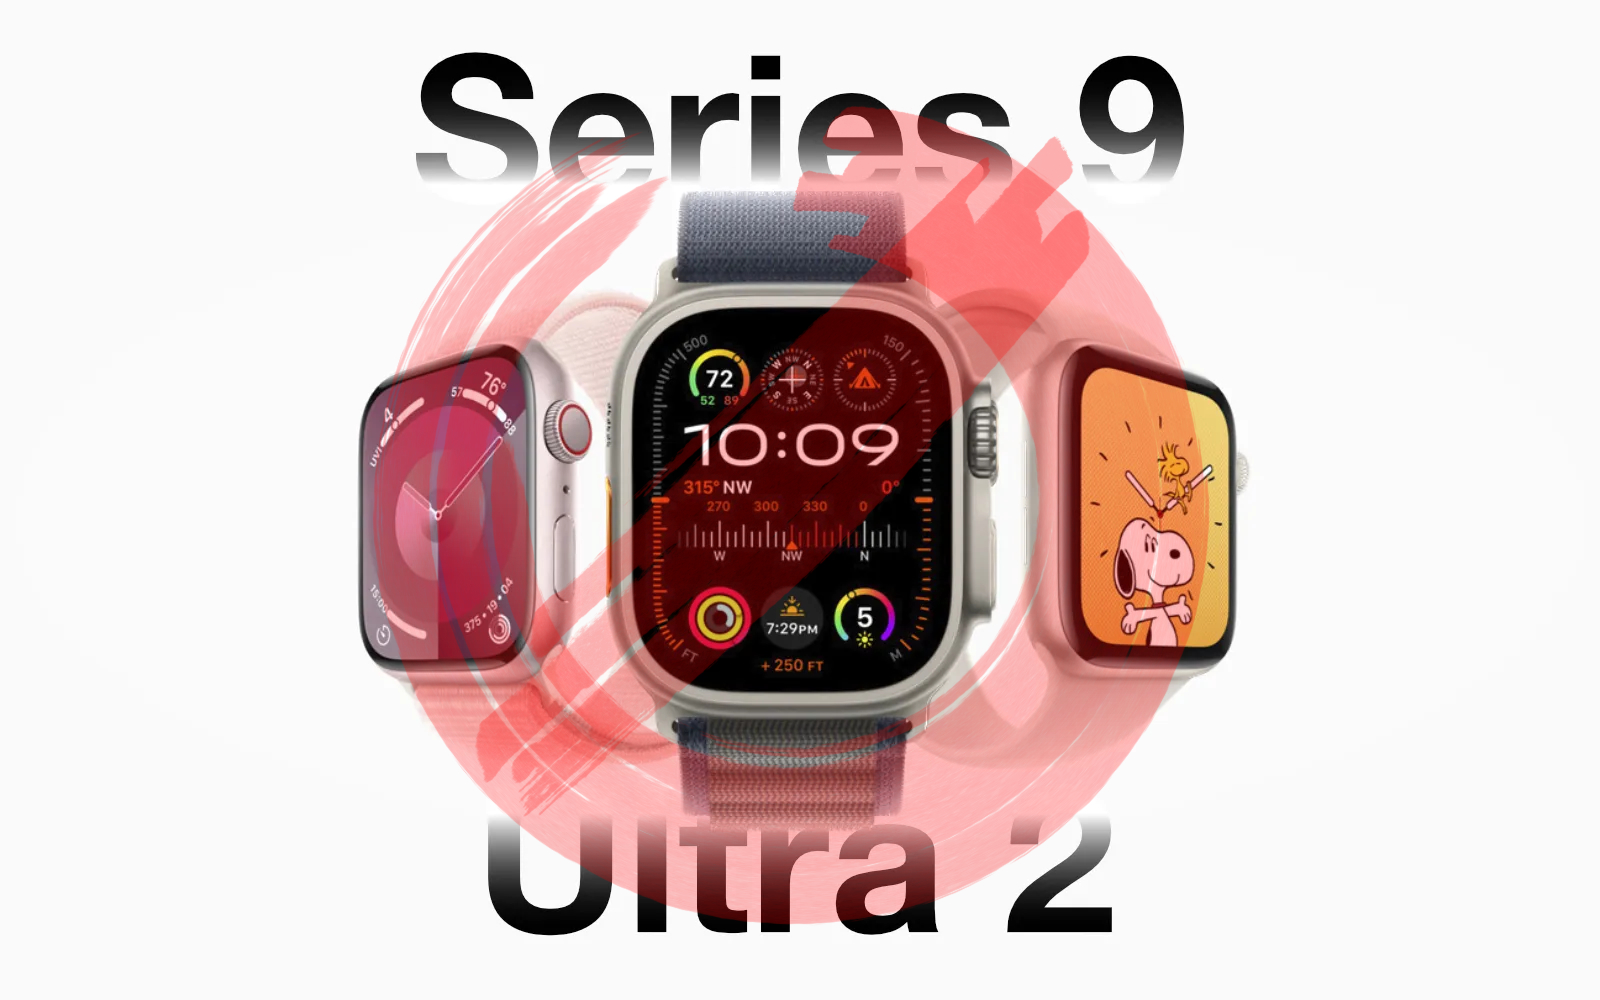 Apple Watch S9 and Ultra2 back on sale